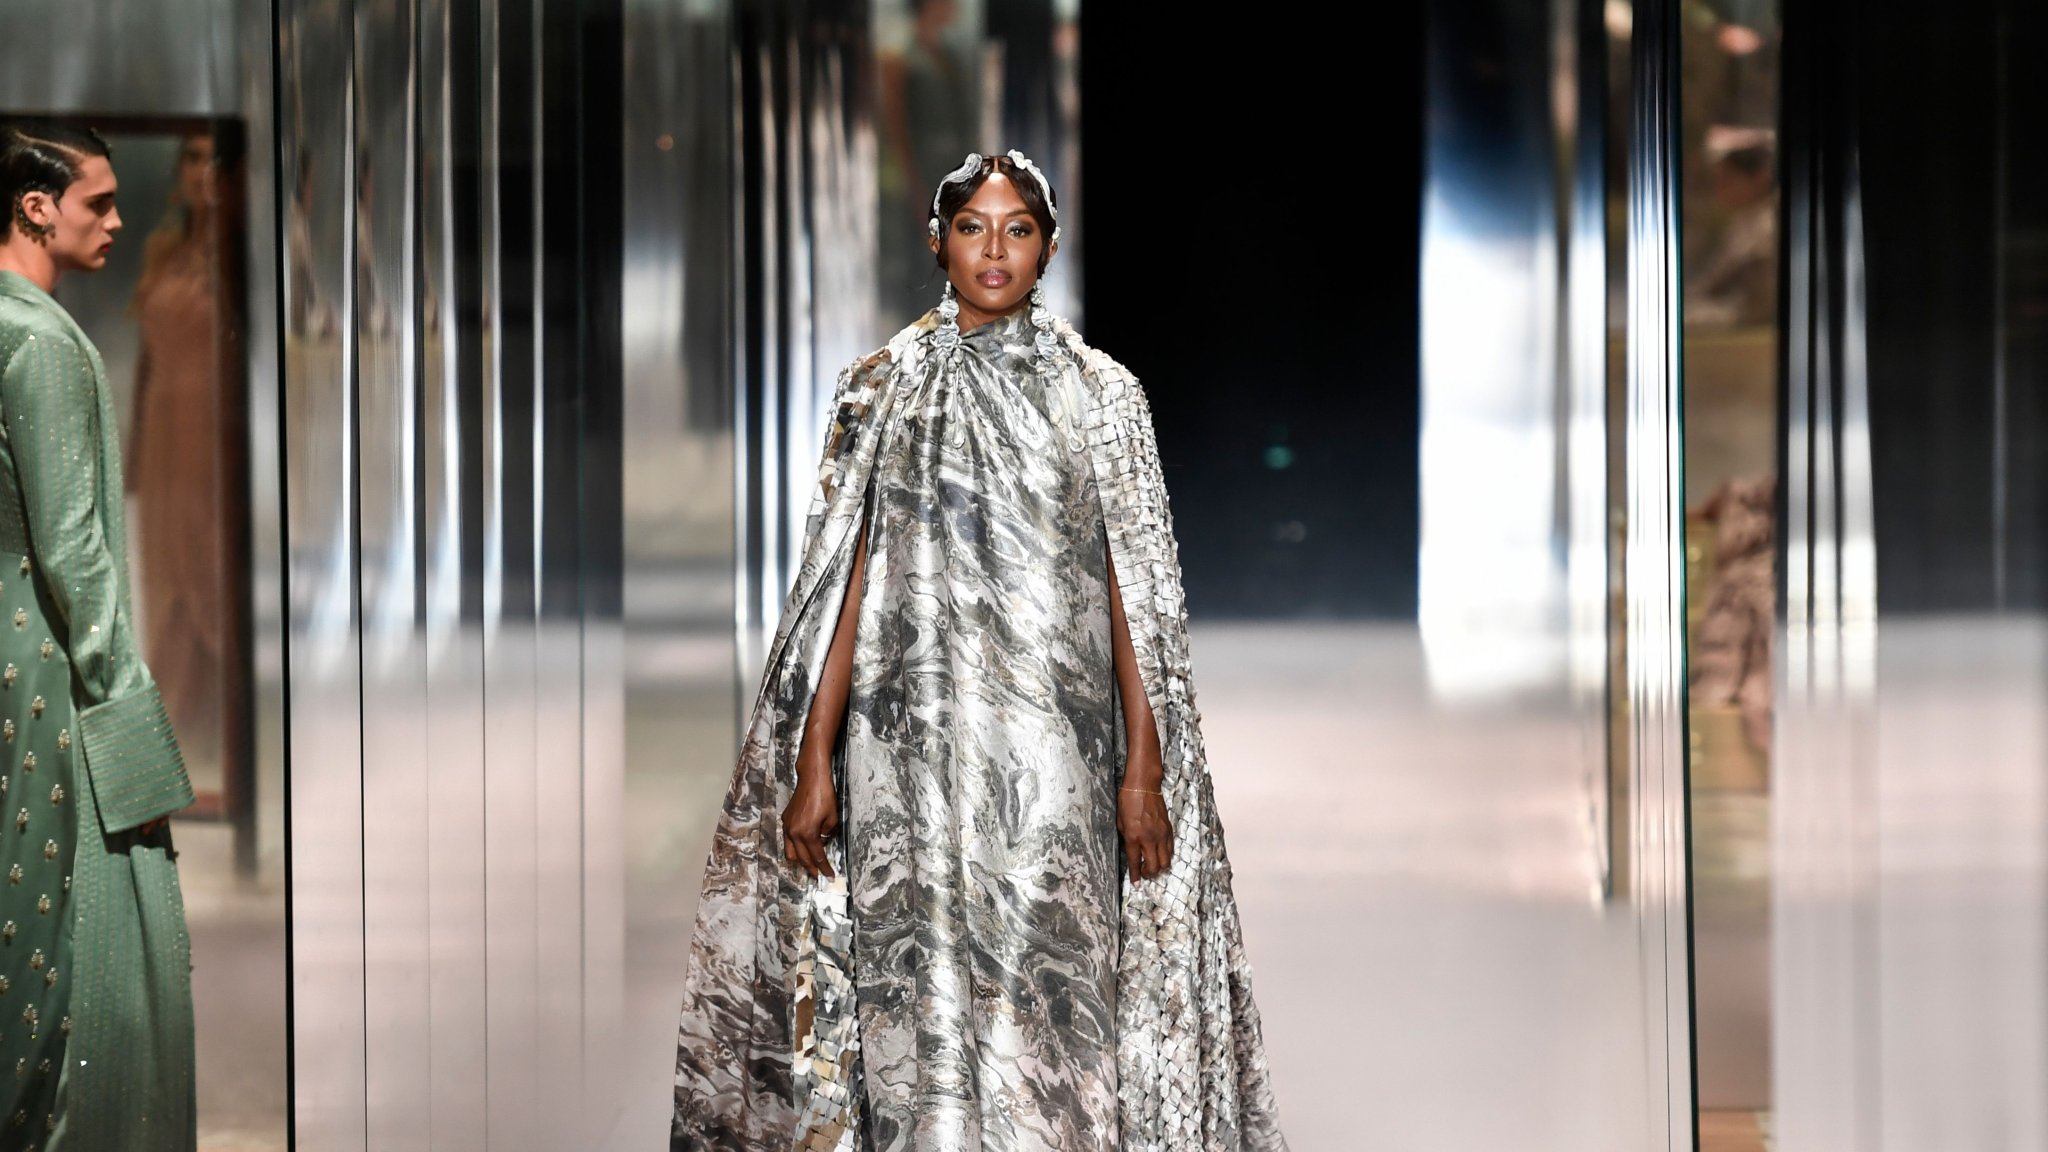 Kim Jones Kicks Off His Fendi Tenure With A Bold, Star-Studded Couture Offering